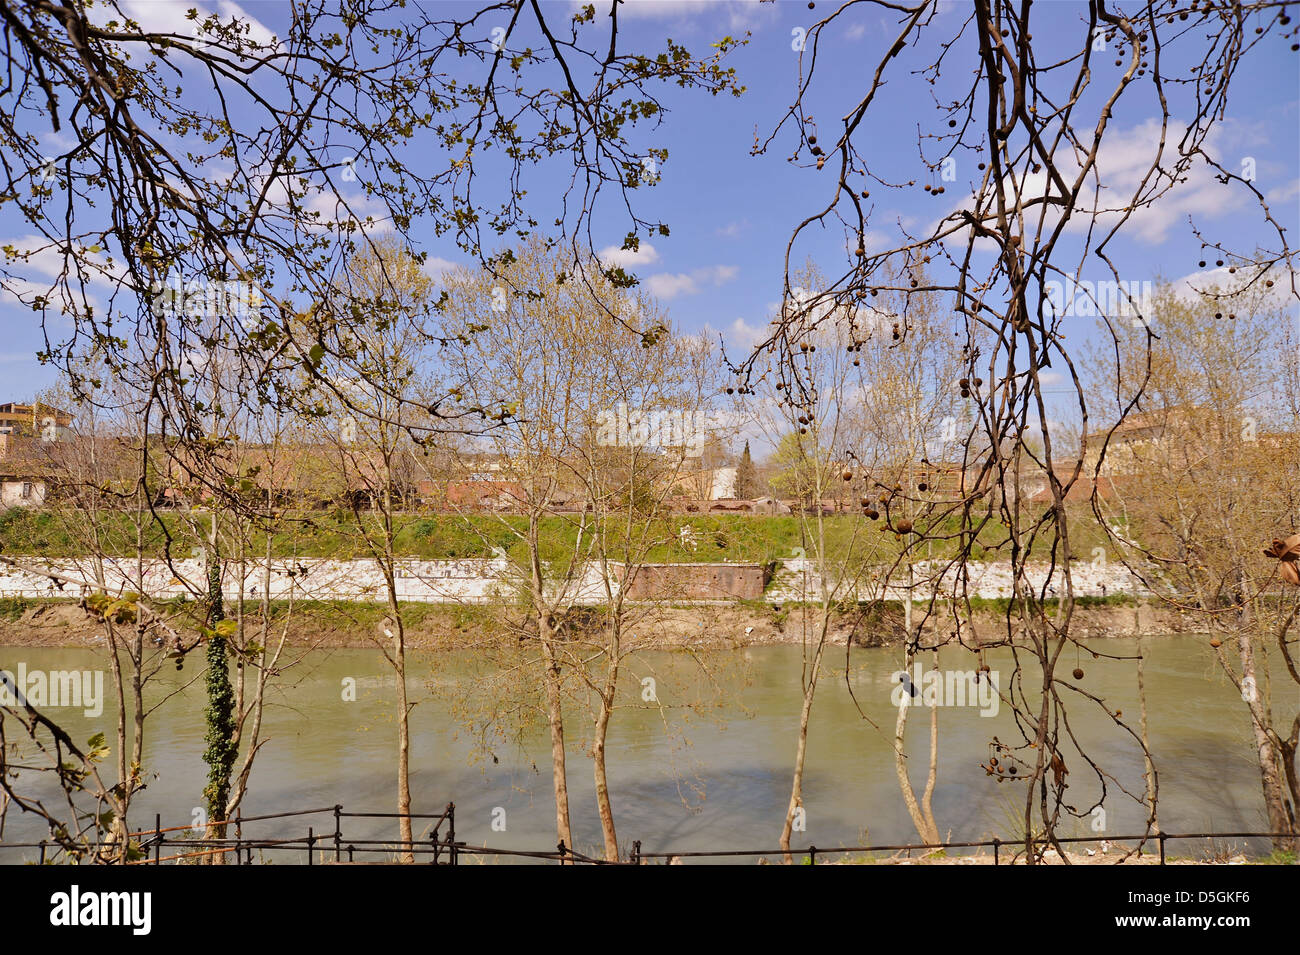 Rome, view of Tevere river through the branches of trees with old buildings Stock Photo